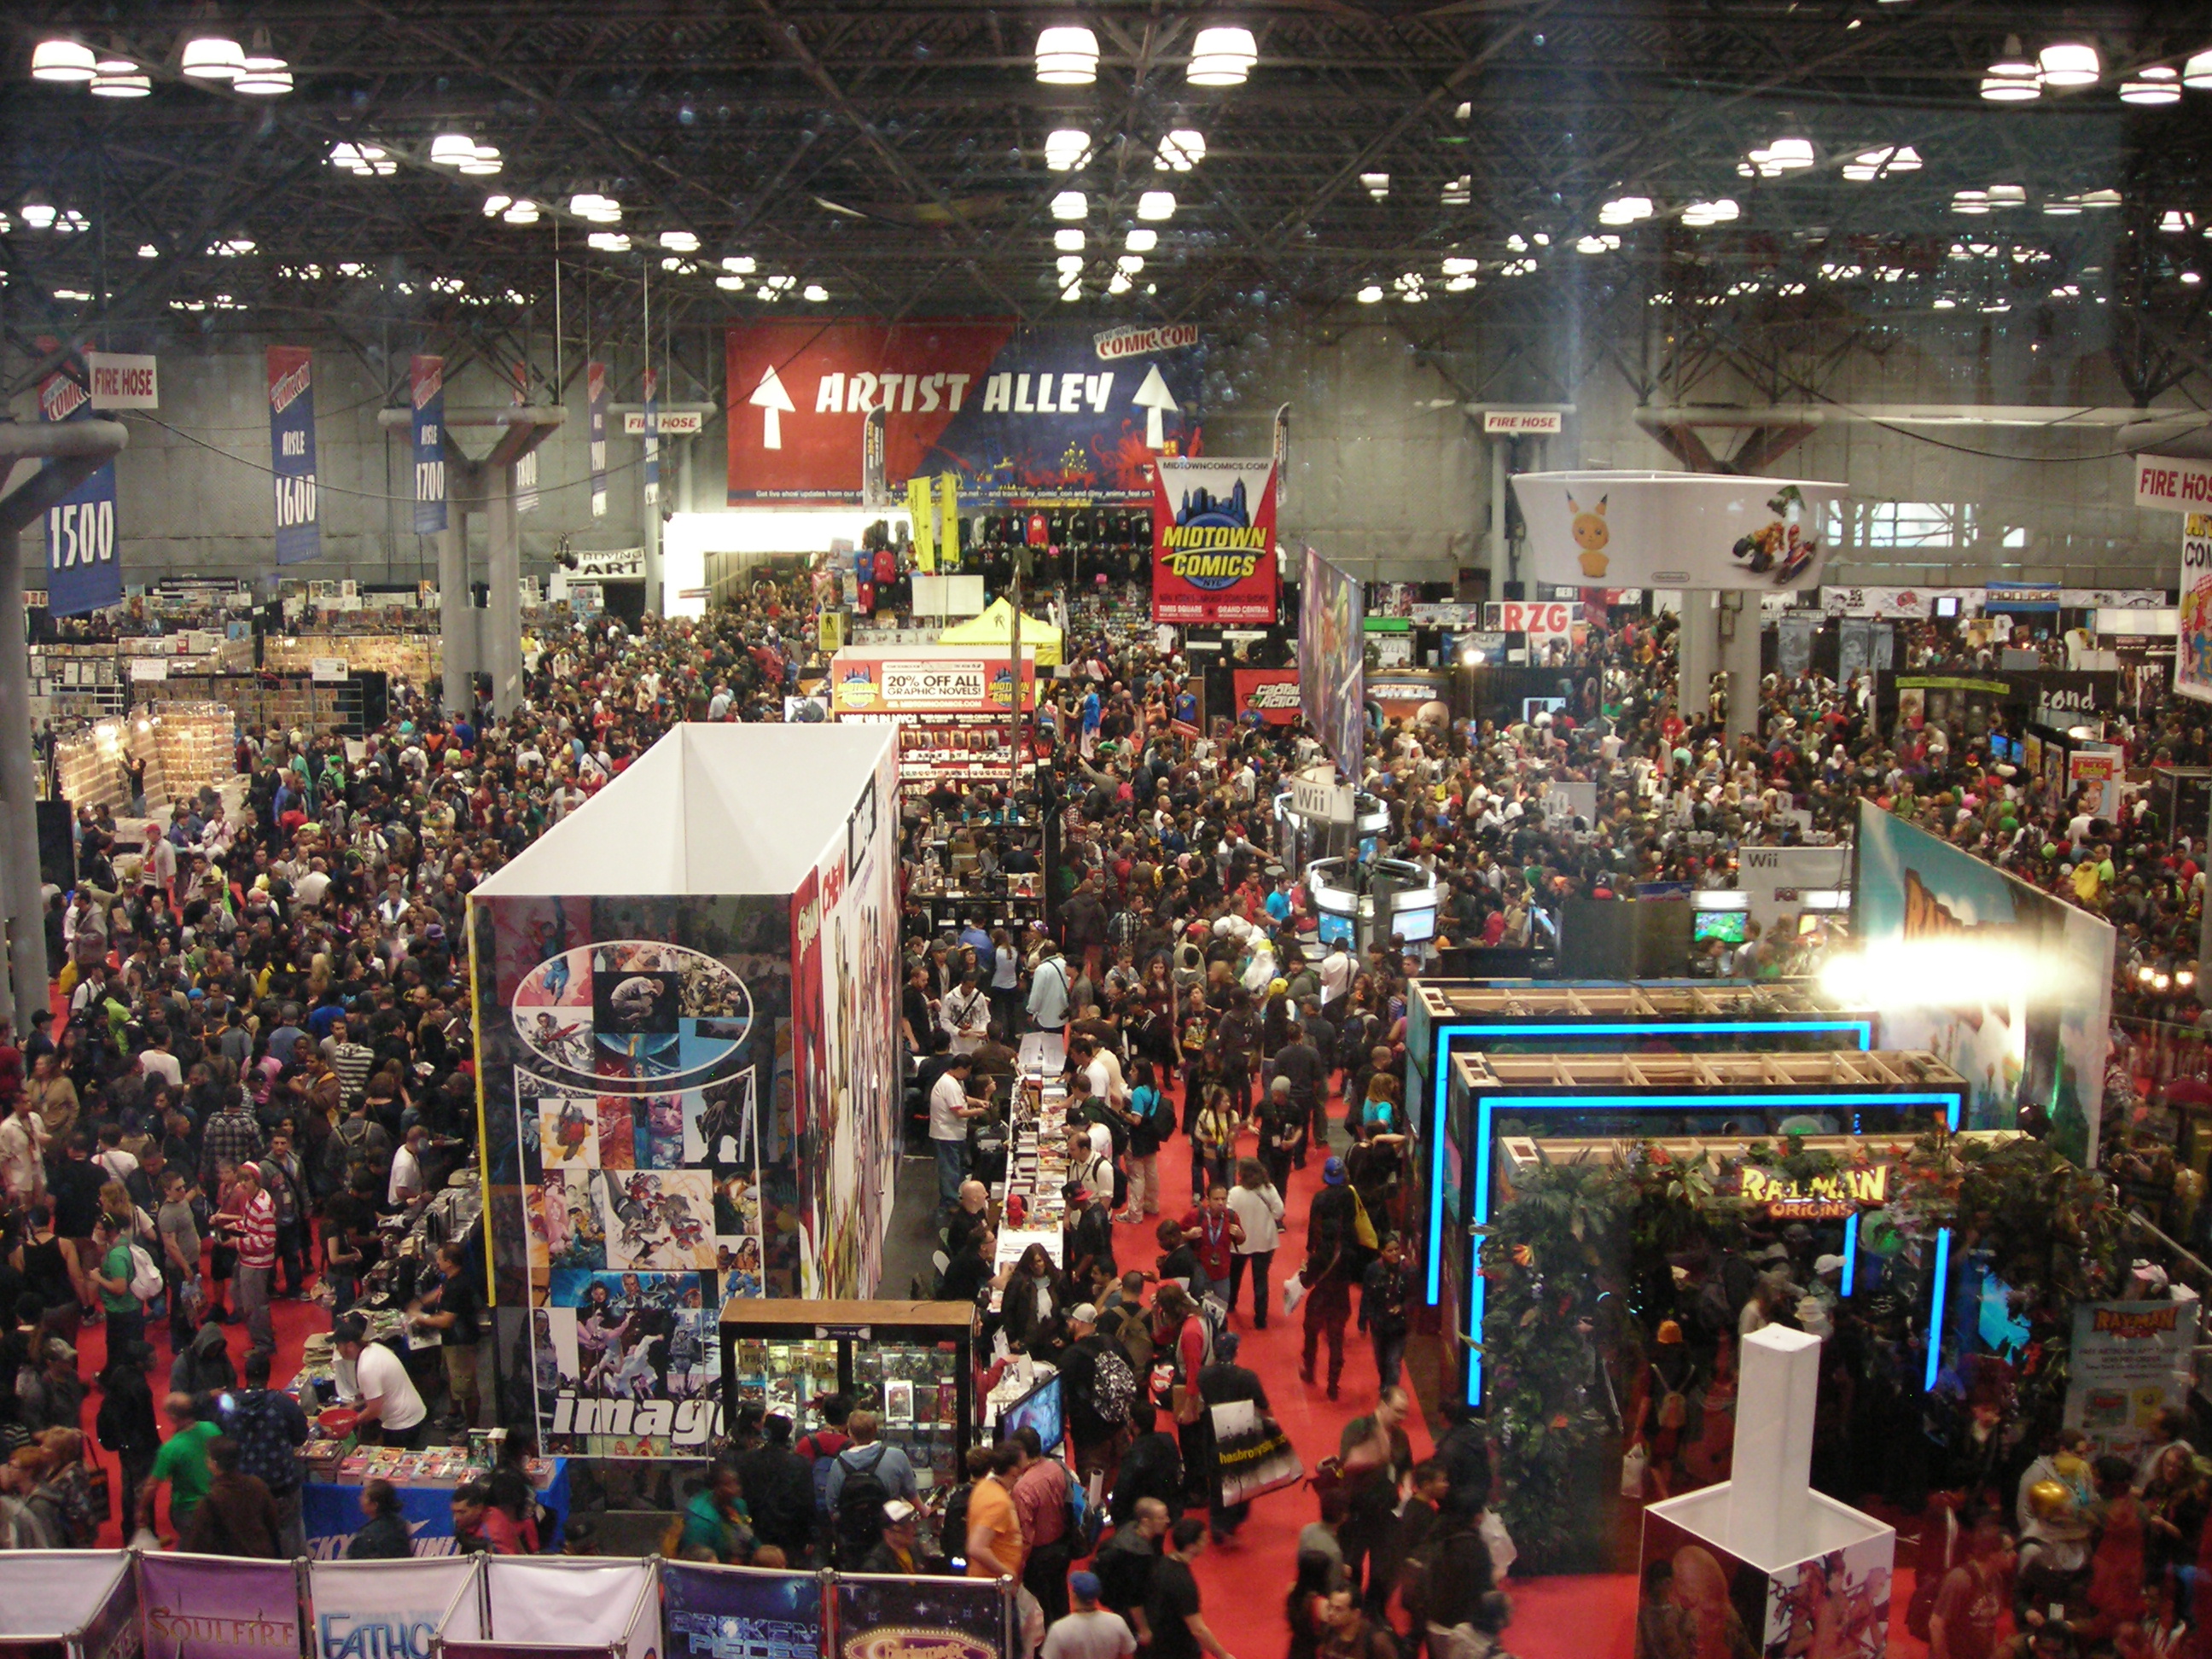 Comic con new york cast hi-res stock photography and images - Alamy